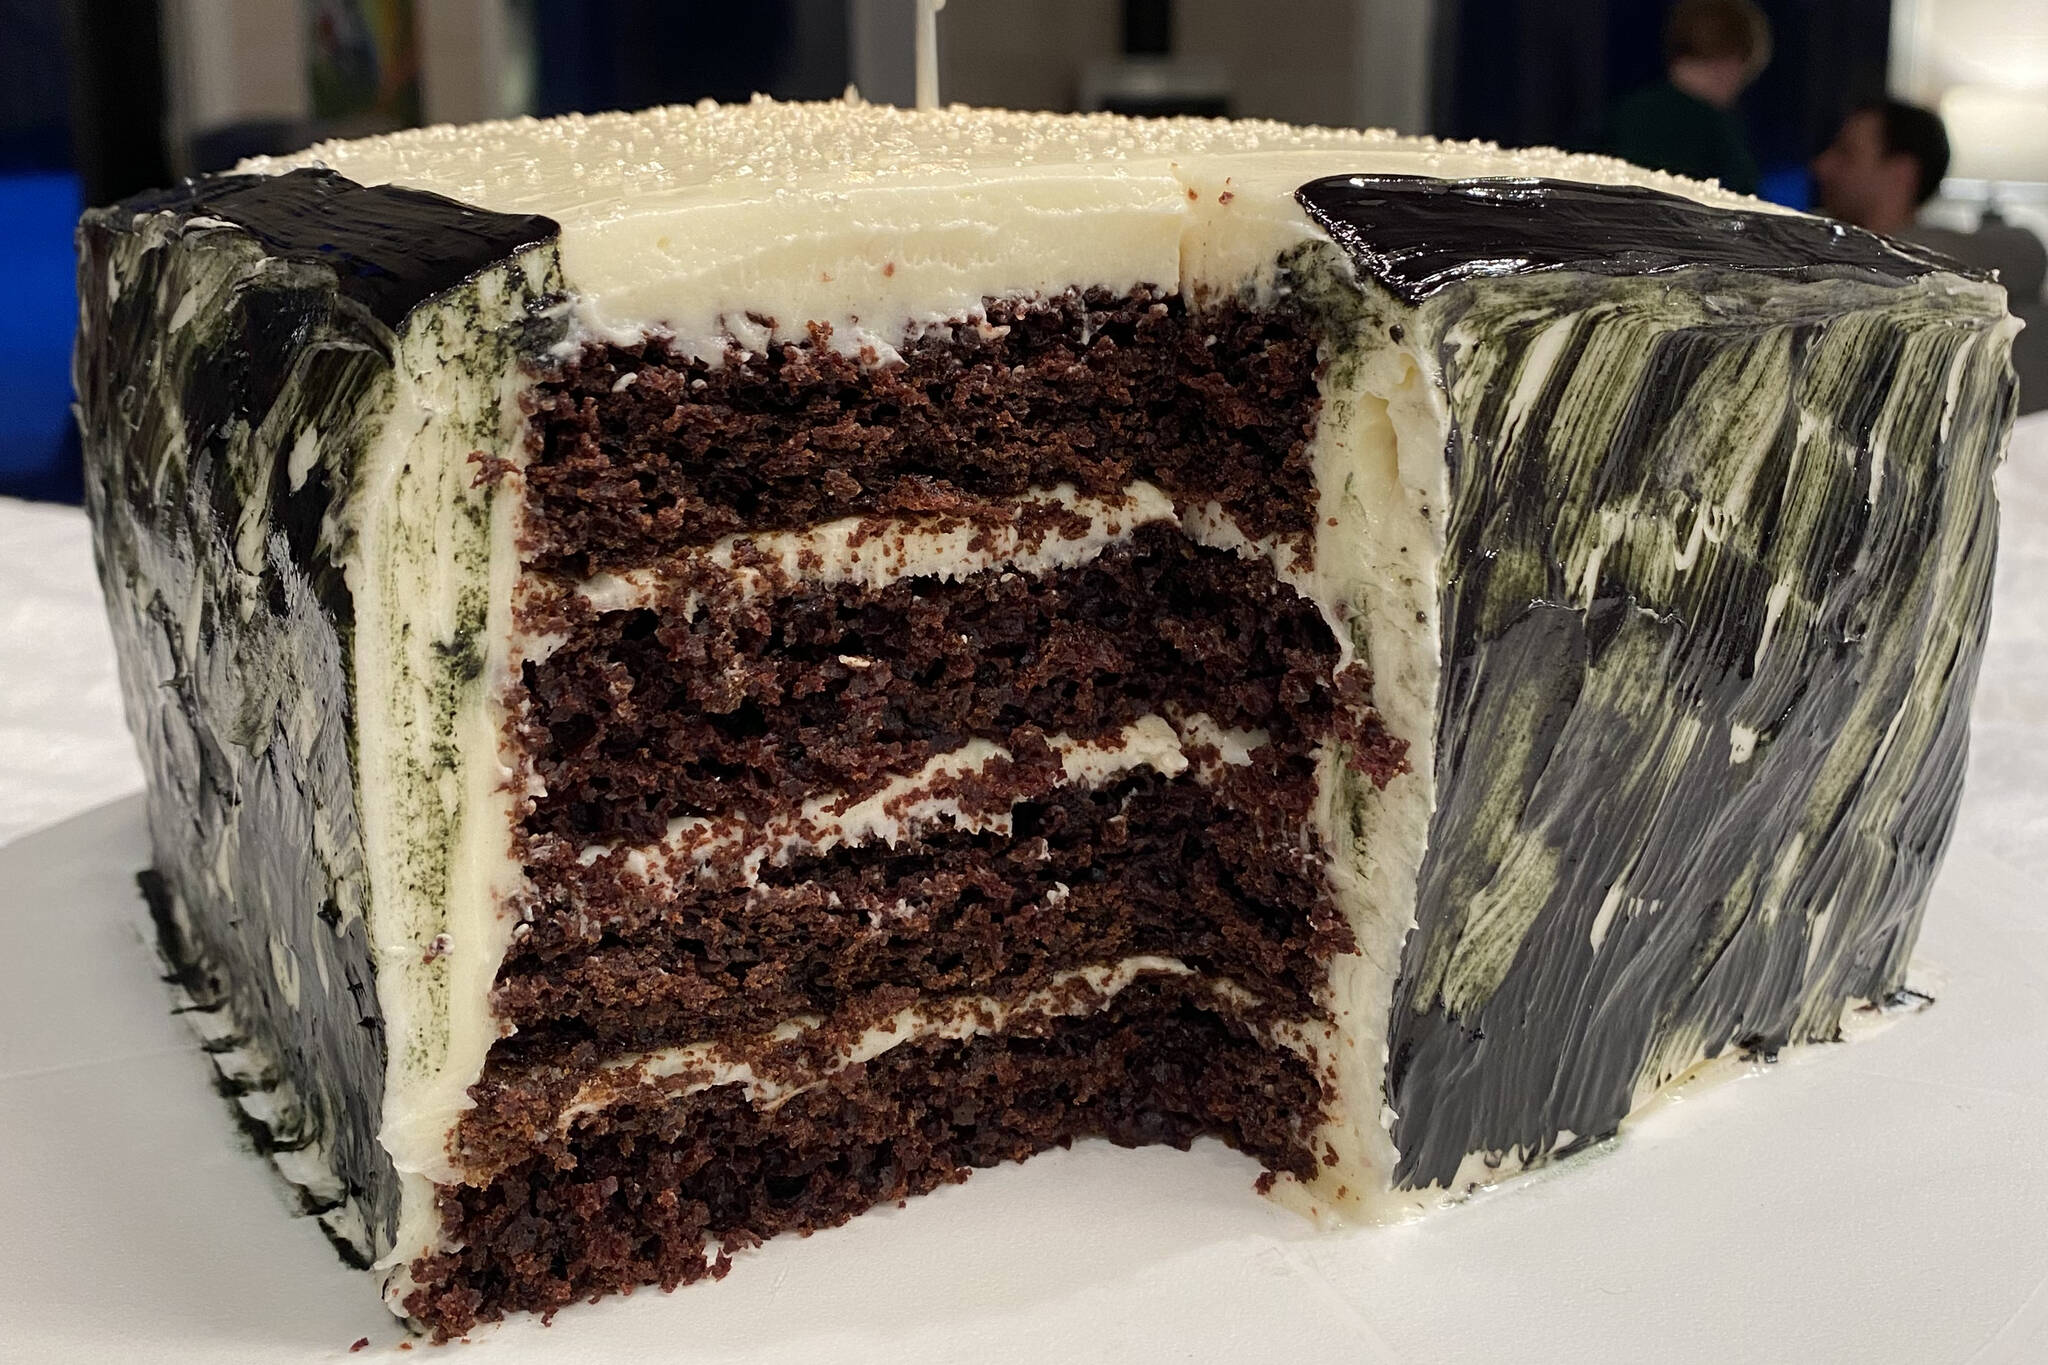 Chocolate cake is topped with white chocolate cream cheese frosting. (Photo by Tressa Dale/Peninsula Clarion)